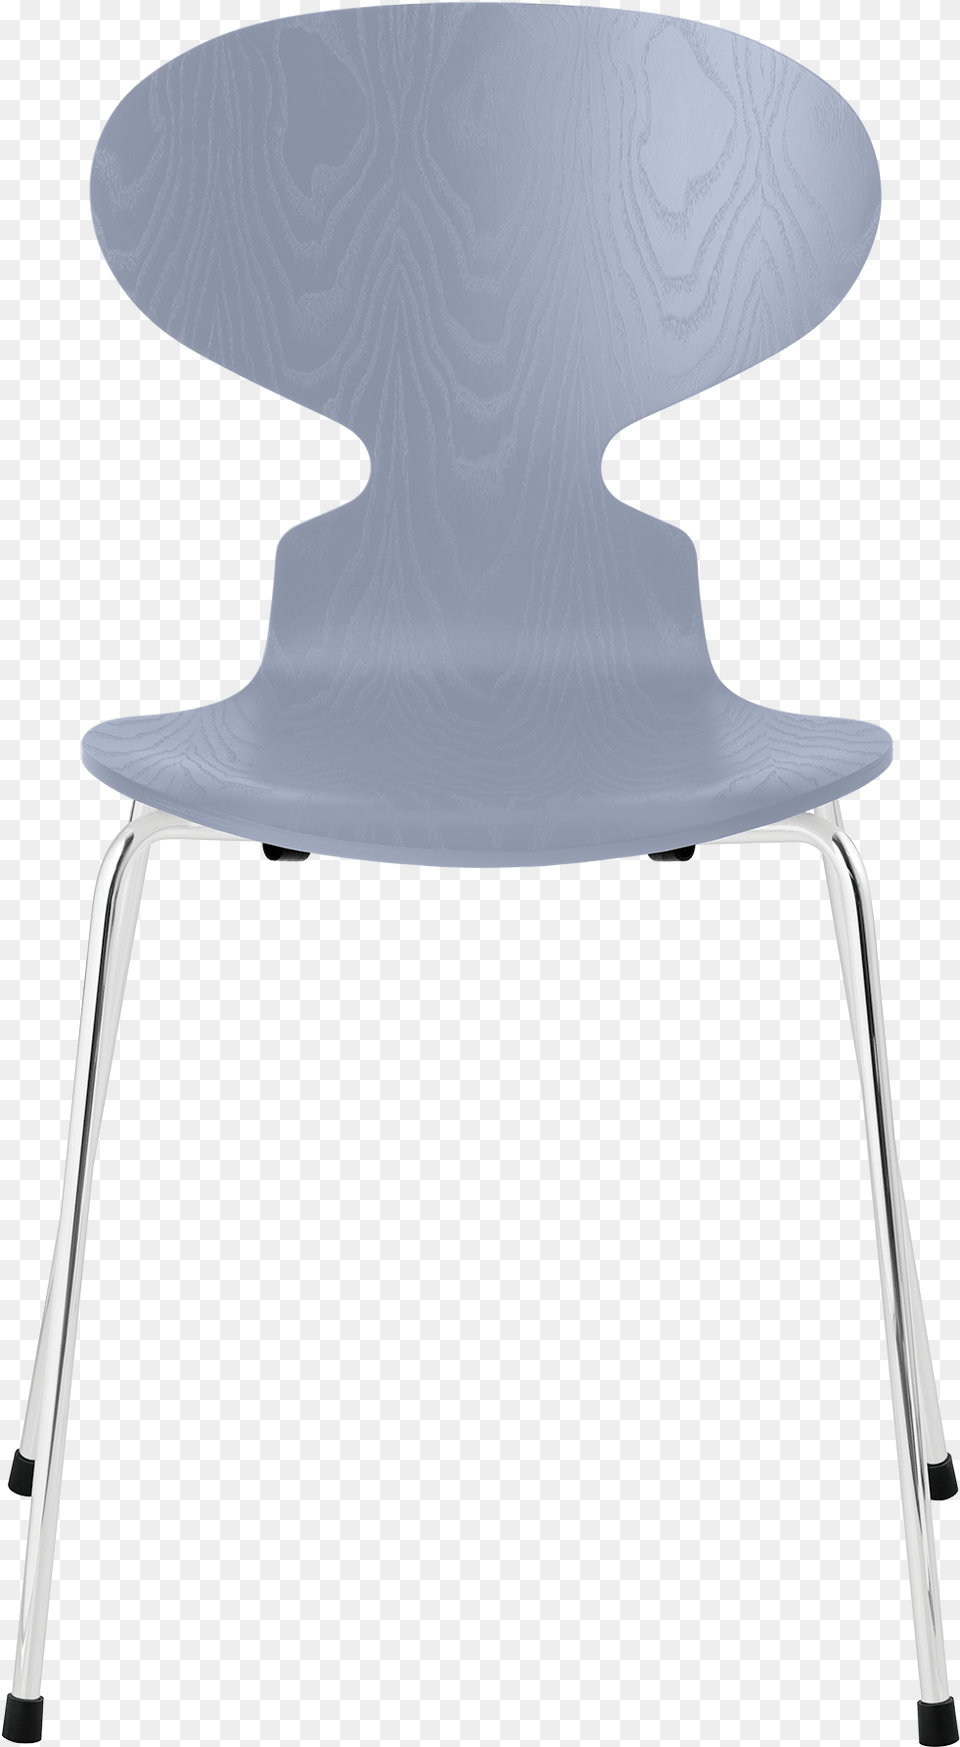 Ant 3101 Ant Chair, Furniture, Plywood, Wood Png